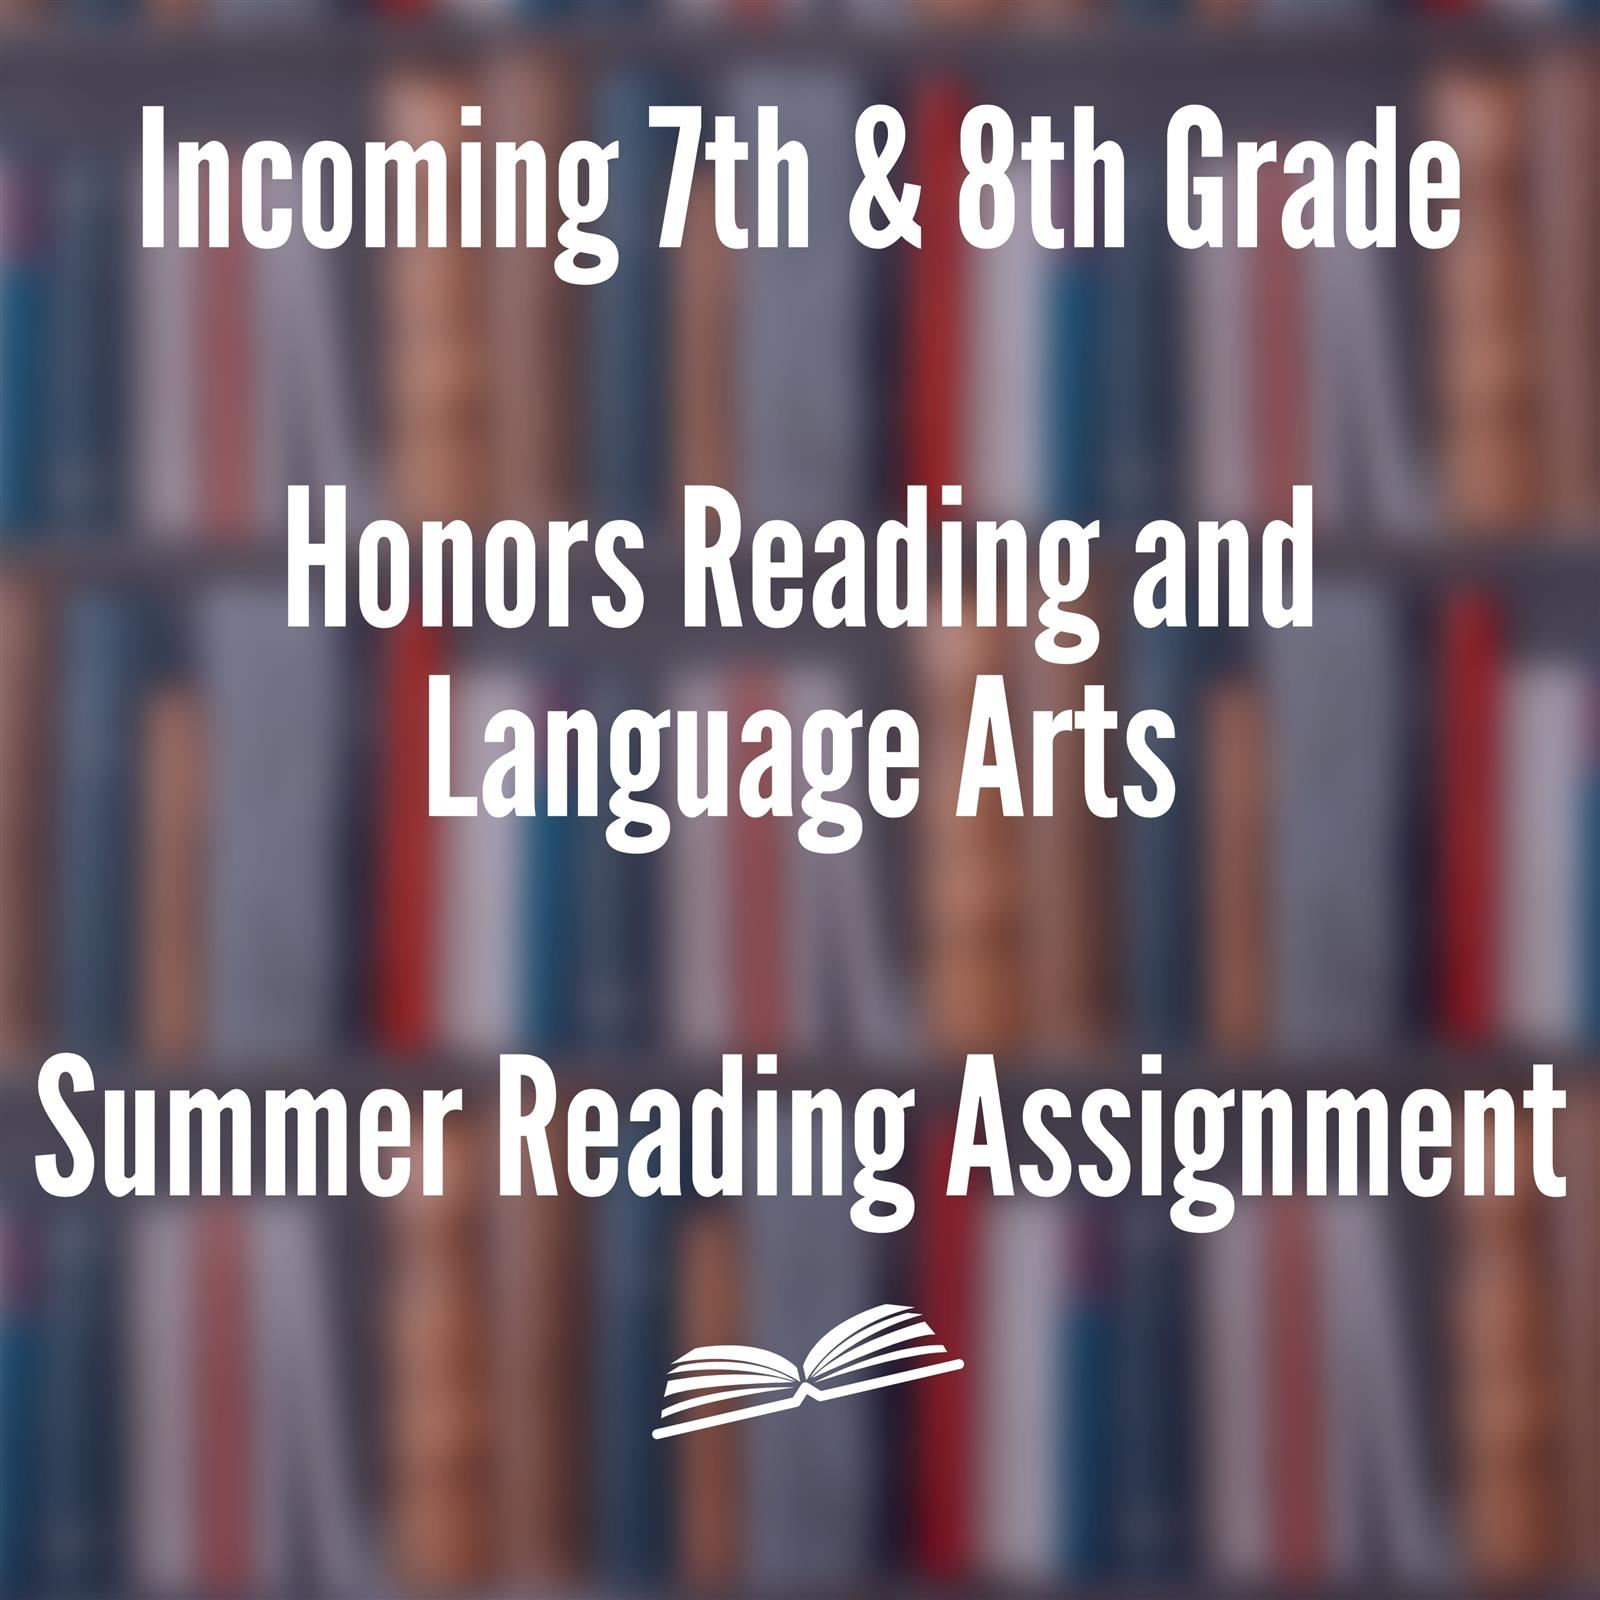  BISD Honors Reading and language arts summer reading assignment